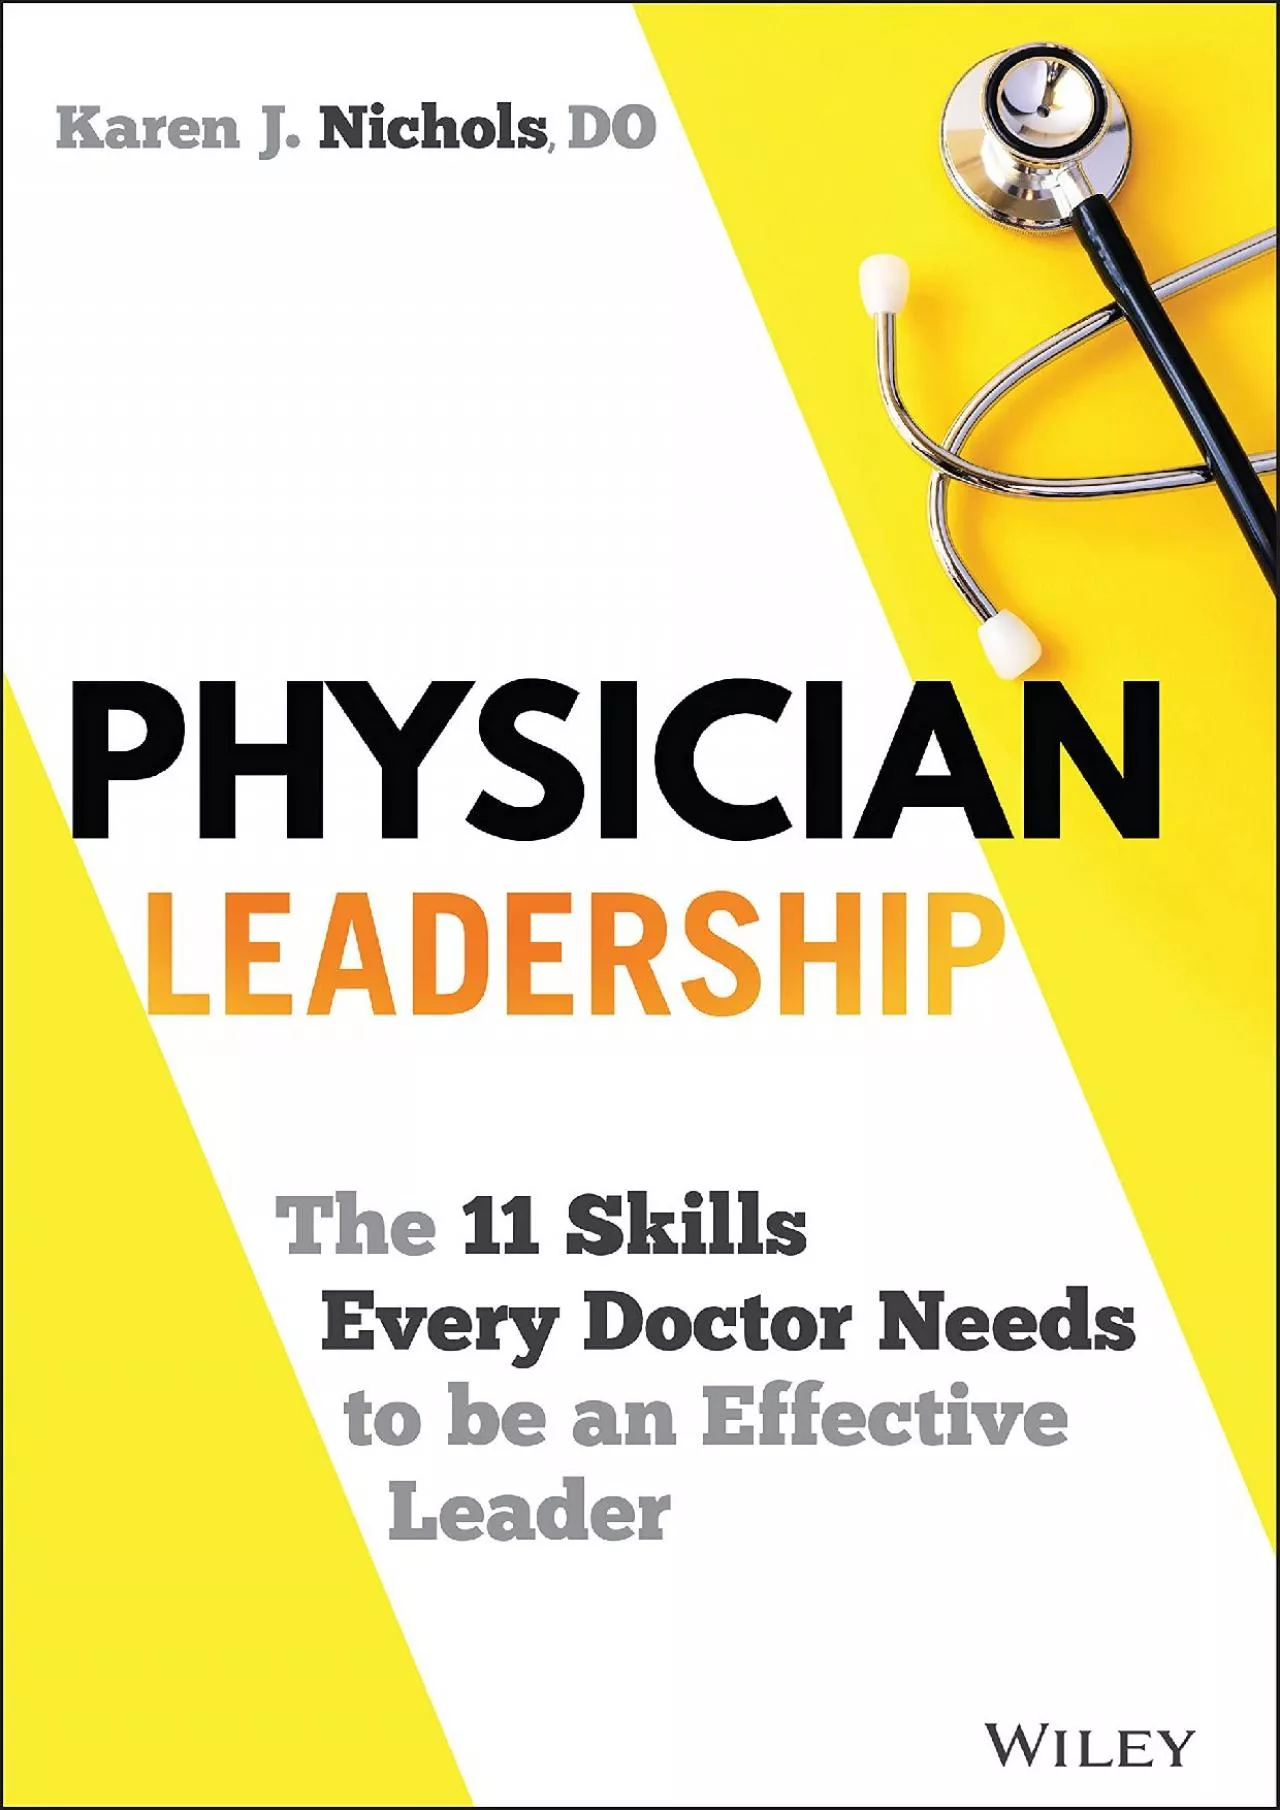 (DOWNLOAD)-Physician Leadership: The 11 Skills Every Doctor Needs to be an Effective Leader